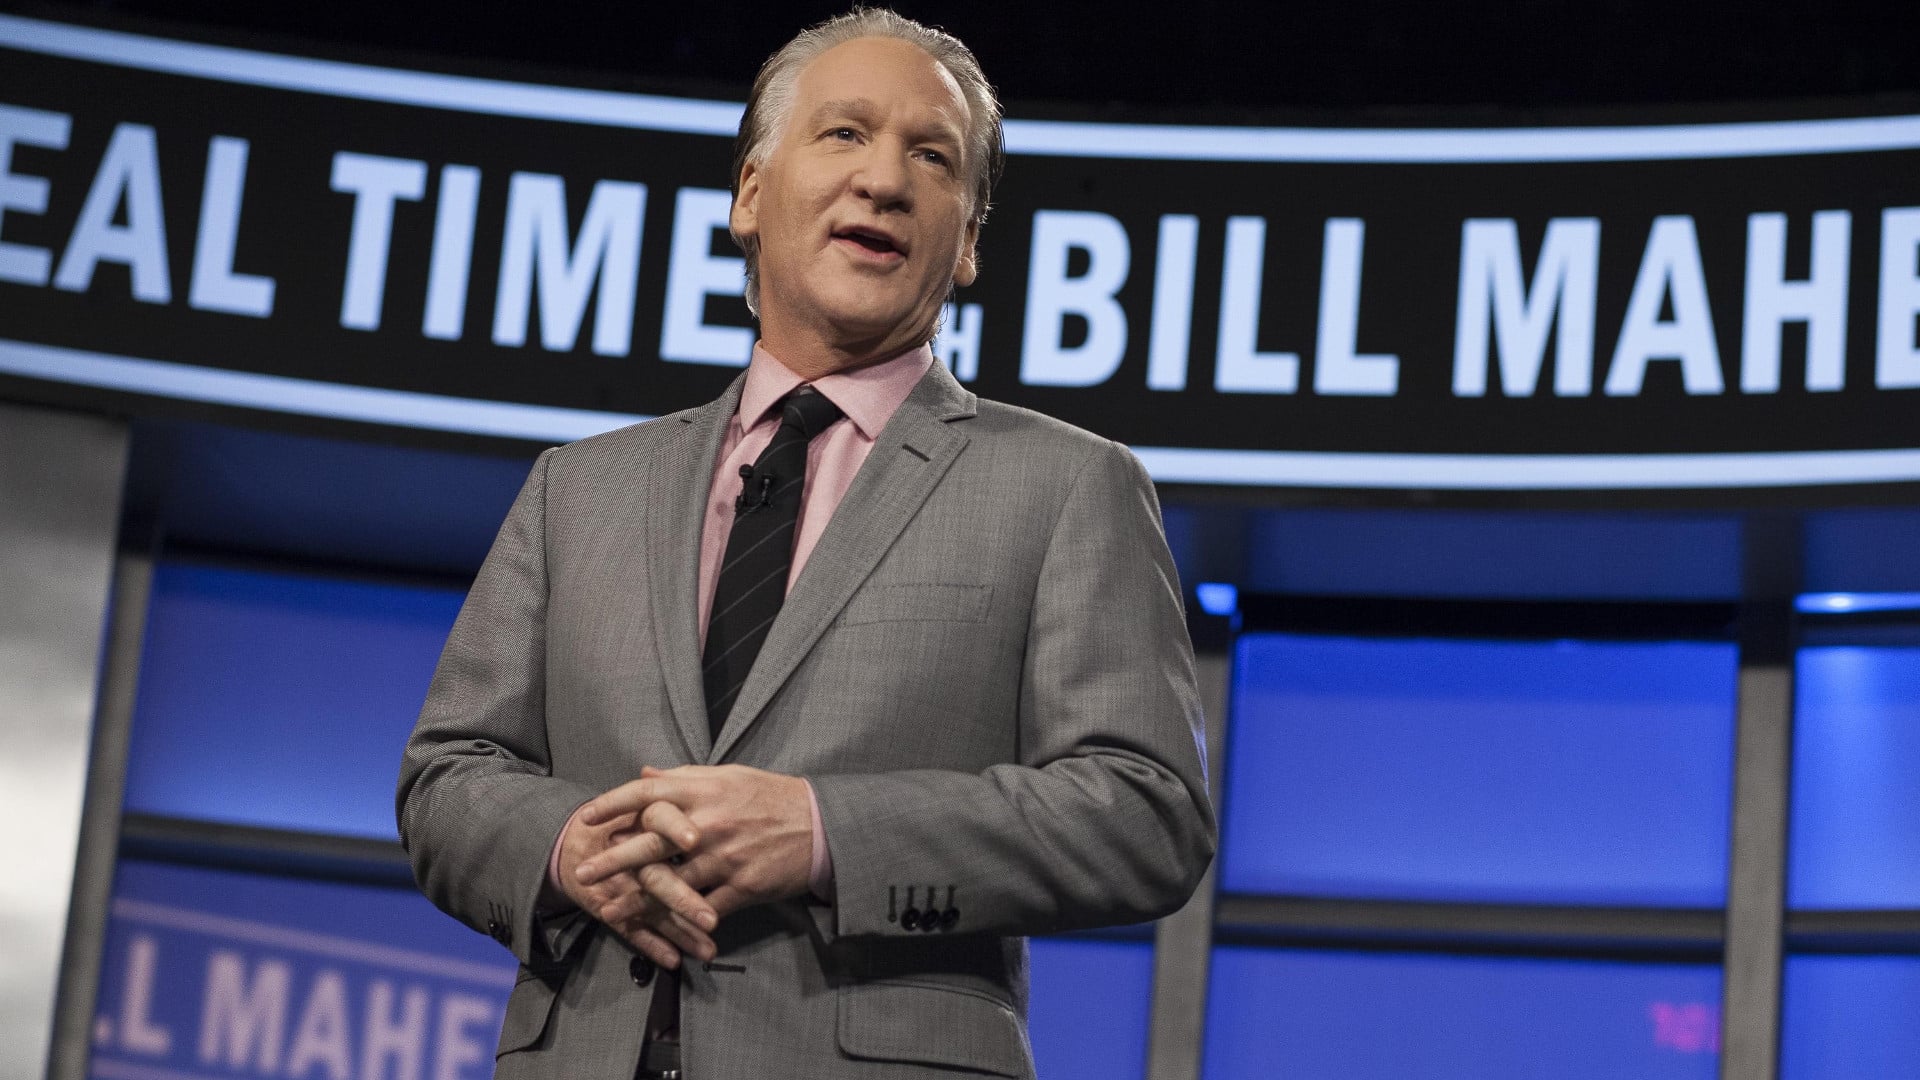 Real Time with Bill Maher - Season 6